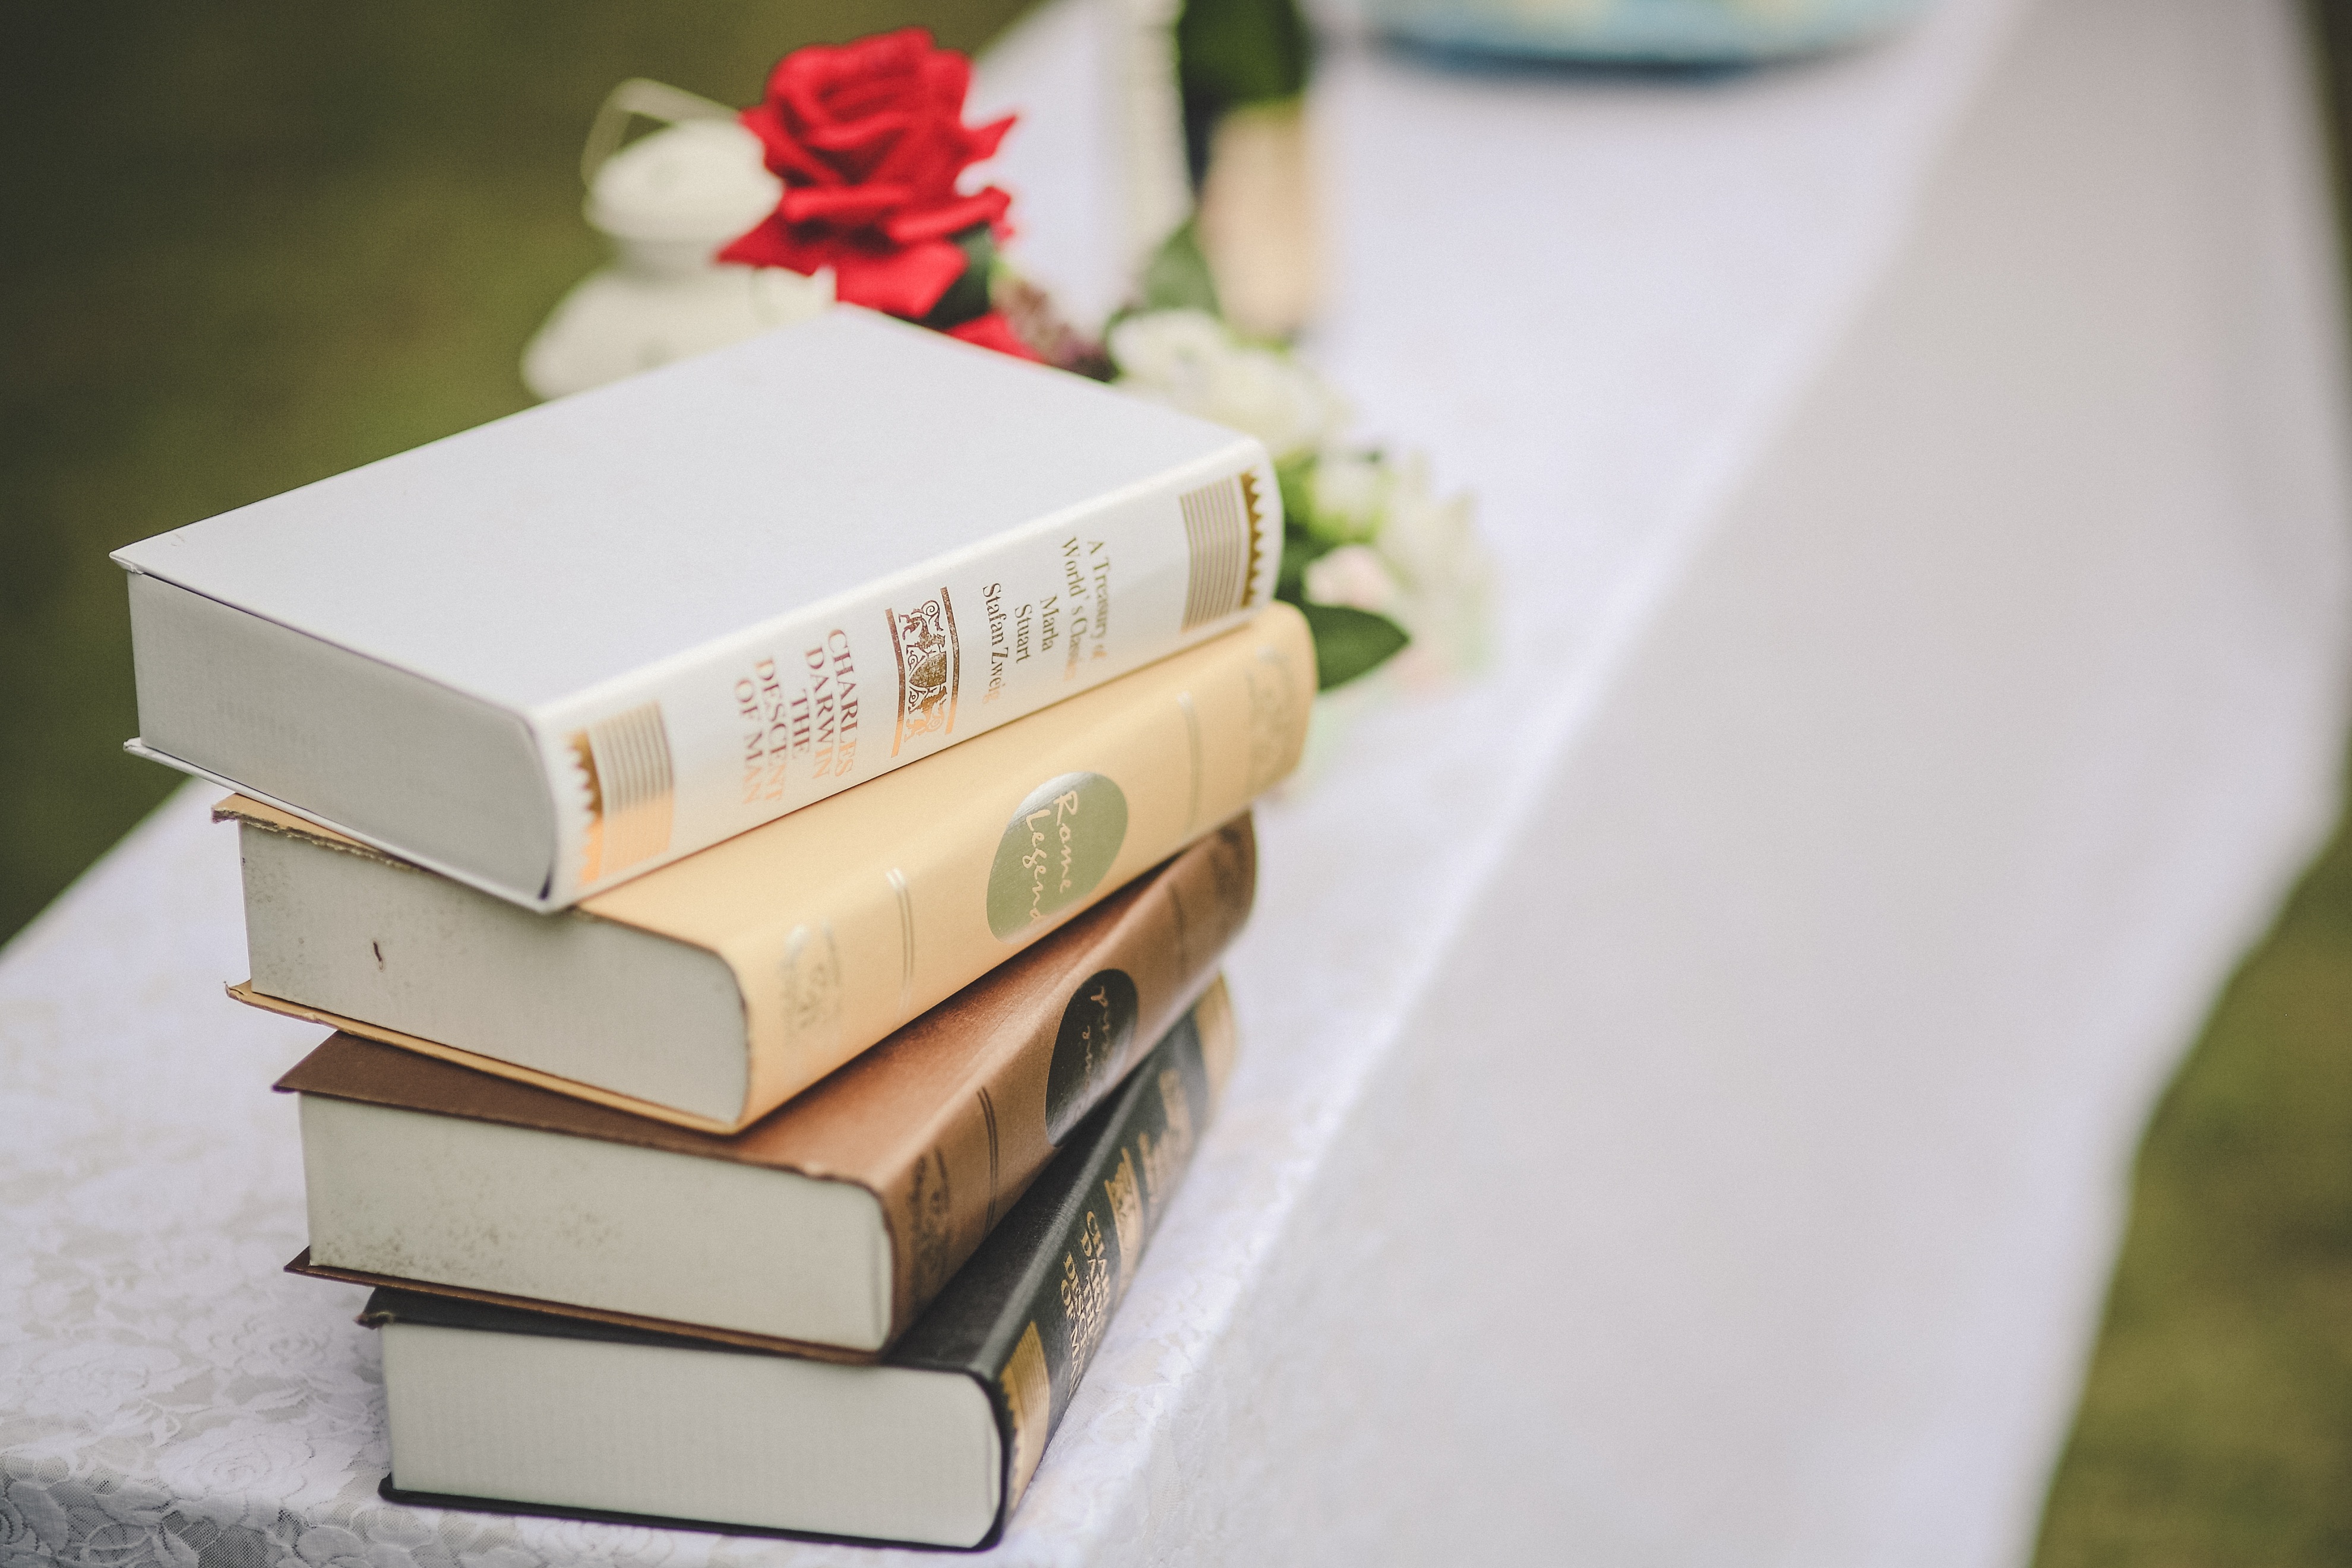 books, flowers, miscellanea, miscellaneous, blur, smooth High Definition image